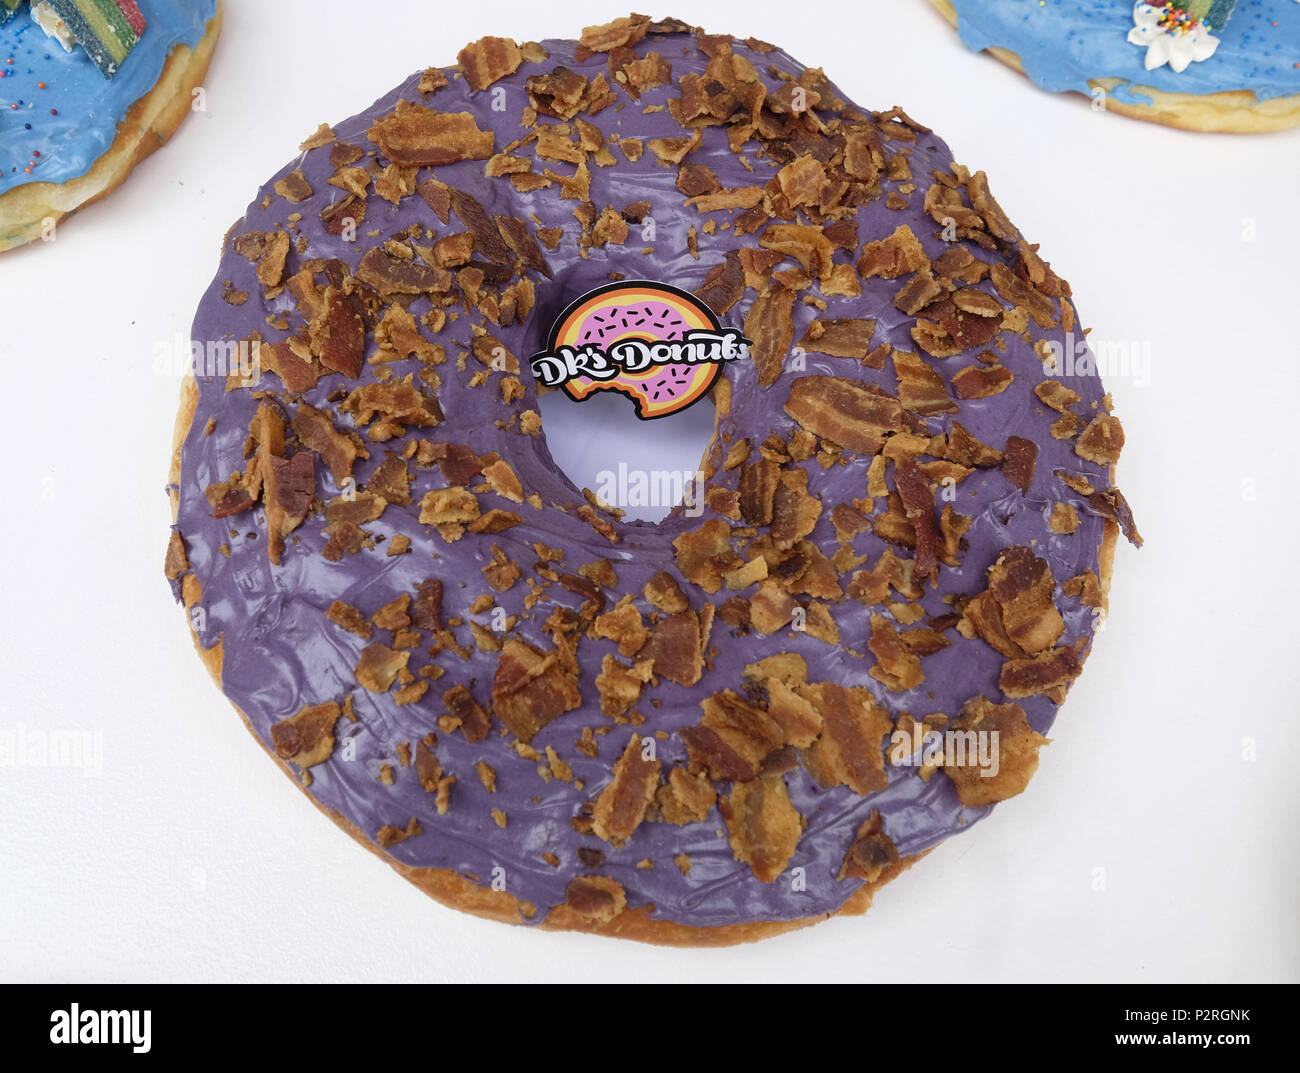 Los Angeles, California, USA. 16th June, 2018. A giant donut is displayed at the inaugural DTLA Donut Festival at Union Station in Los Angeles on Saturday, June 16, 2018. Credit: Ringo Chiu/ZUMA Wire/Alamy Live News Stock Photo